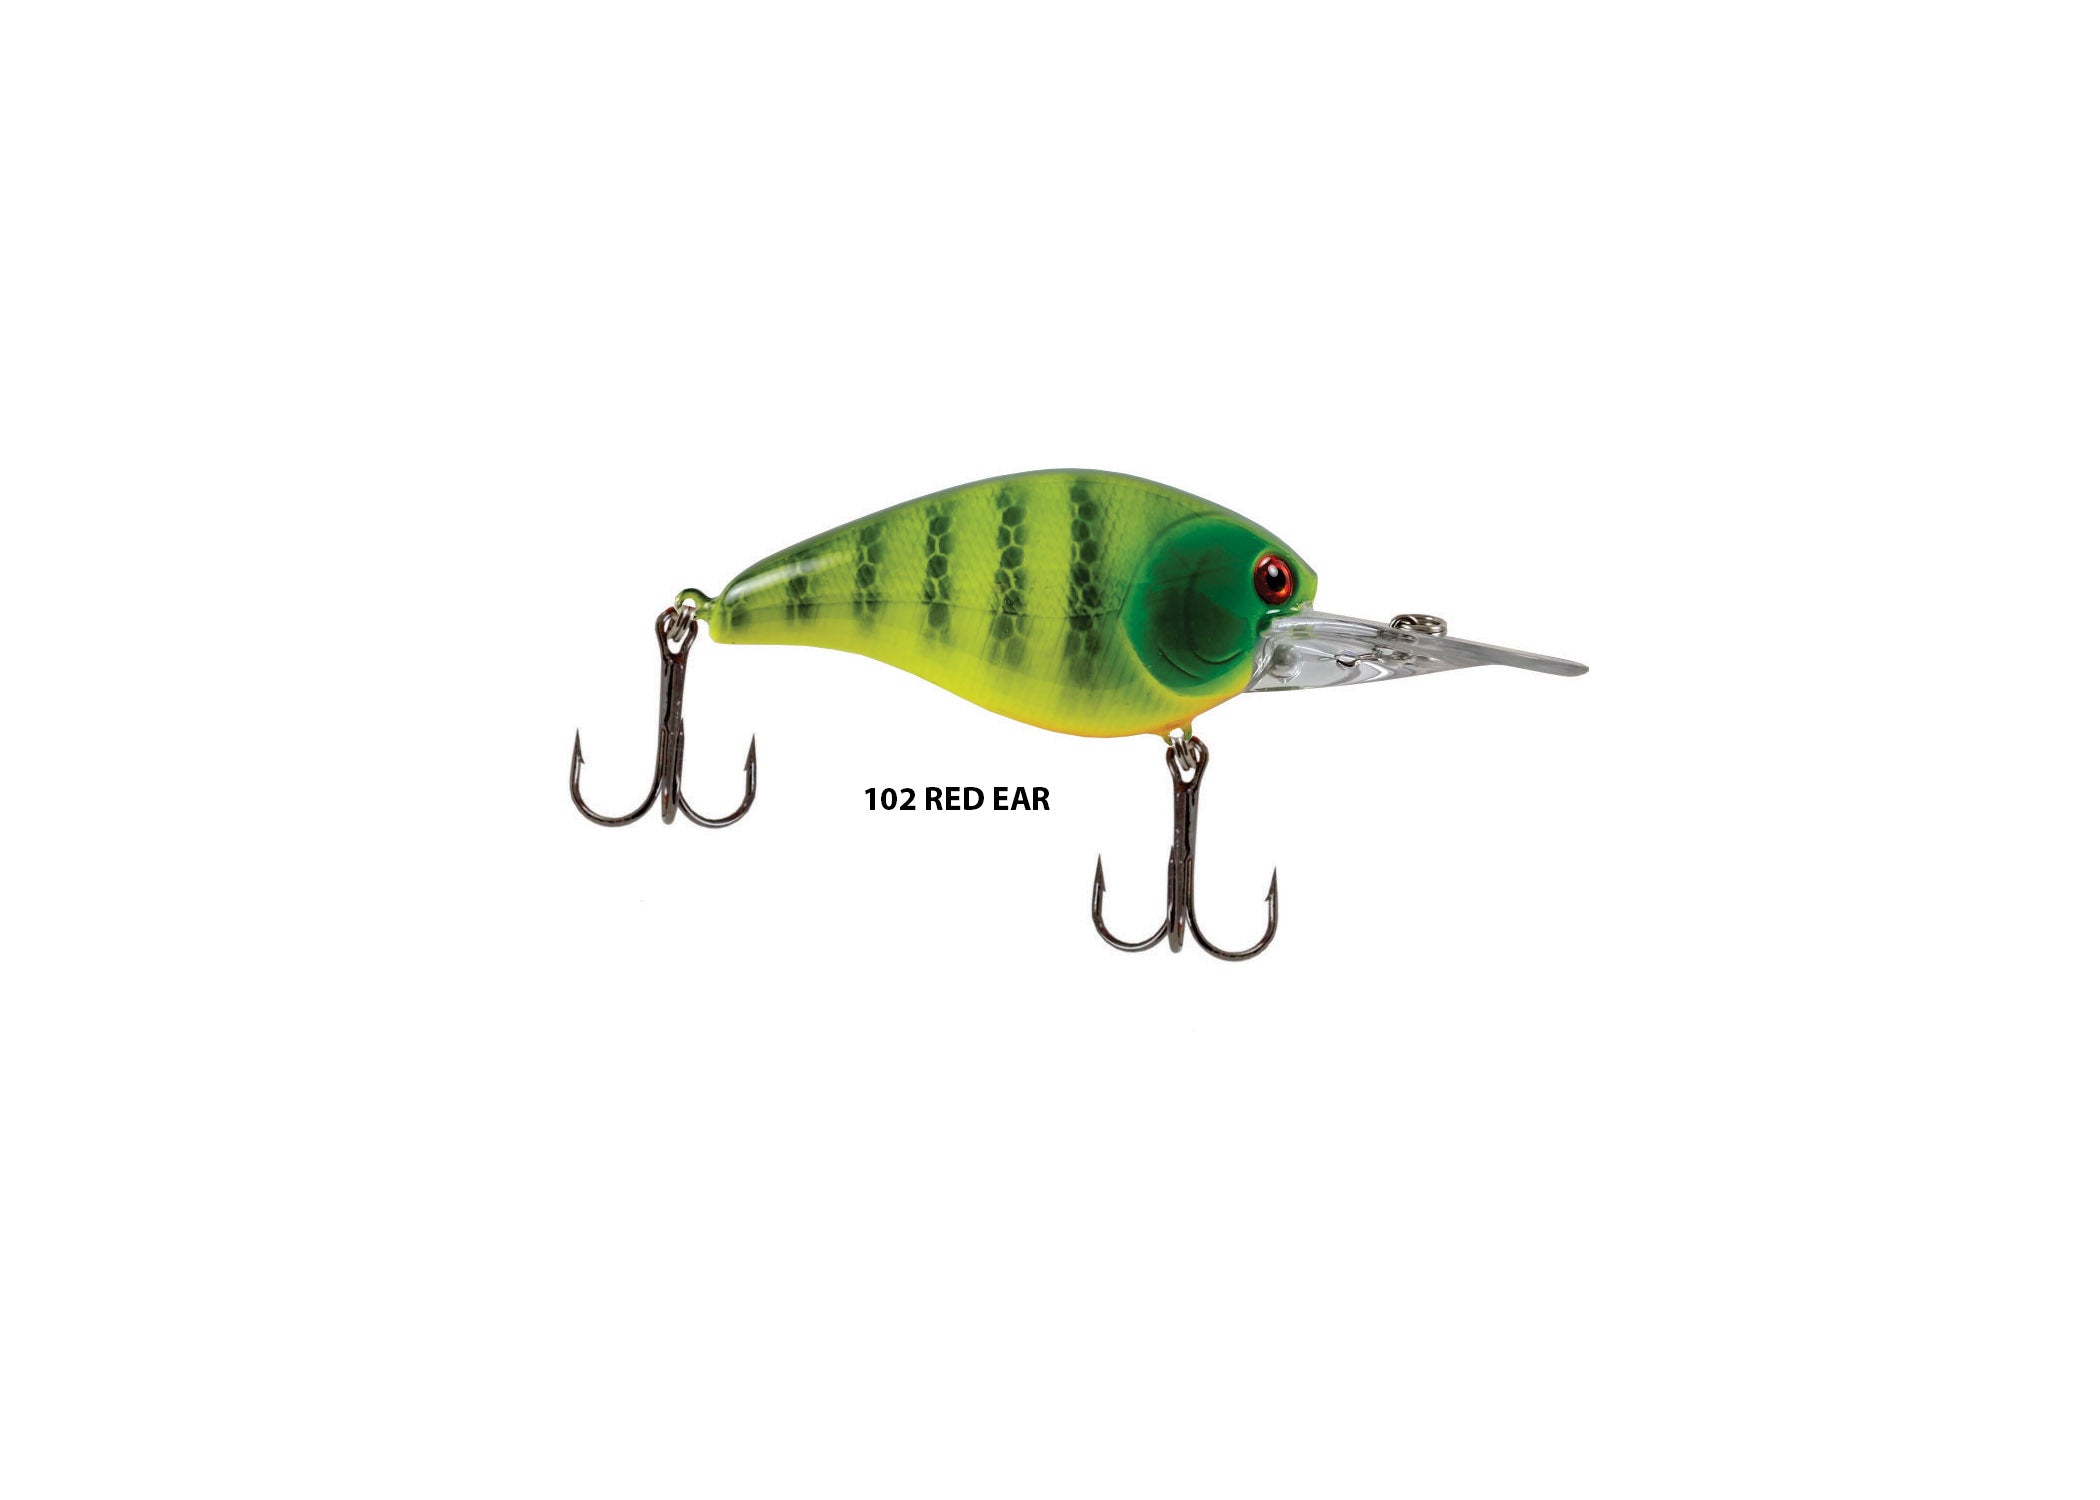 American Original Deep Smoothy AOS2 – Jimmy Houston Outdoors and